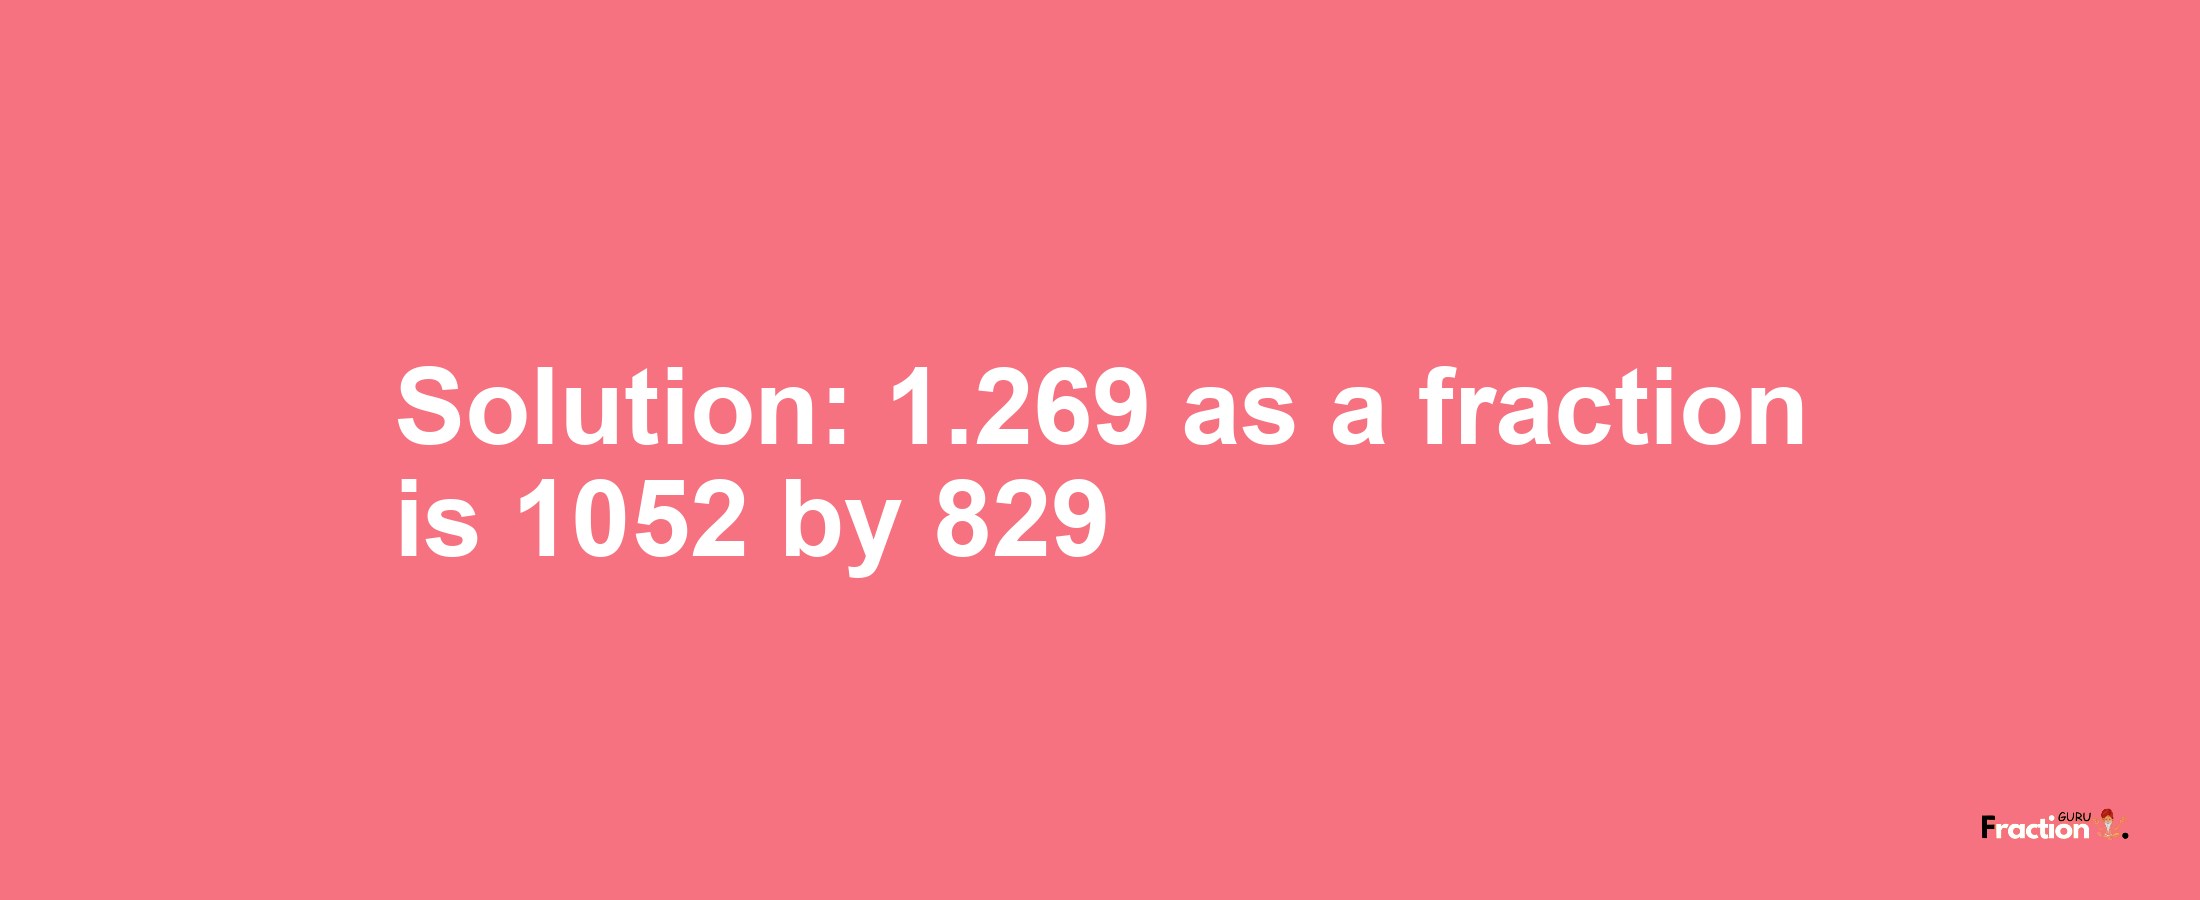 Solution:1.269 as a fraction is 1052/829